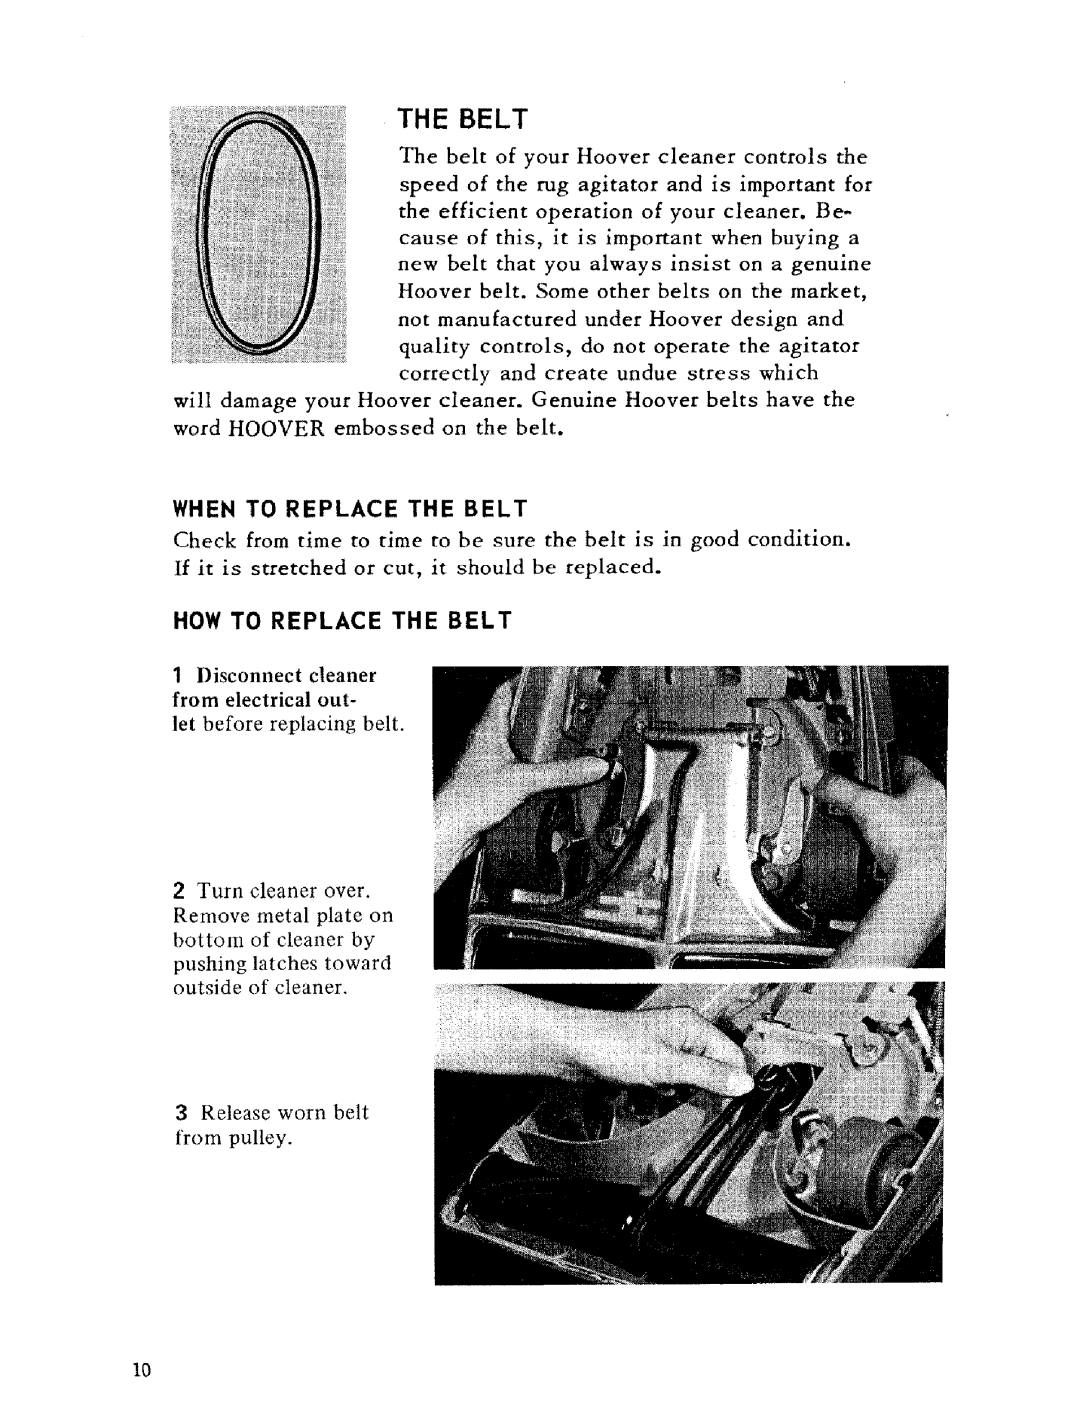 Hoover U4001 owner manual How To Replace The Belt, When To Replace The Belt 